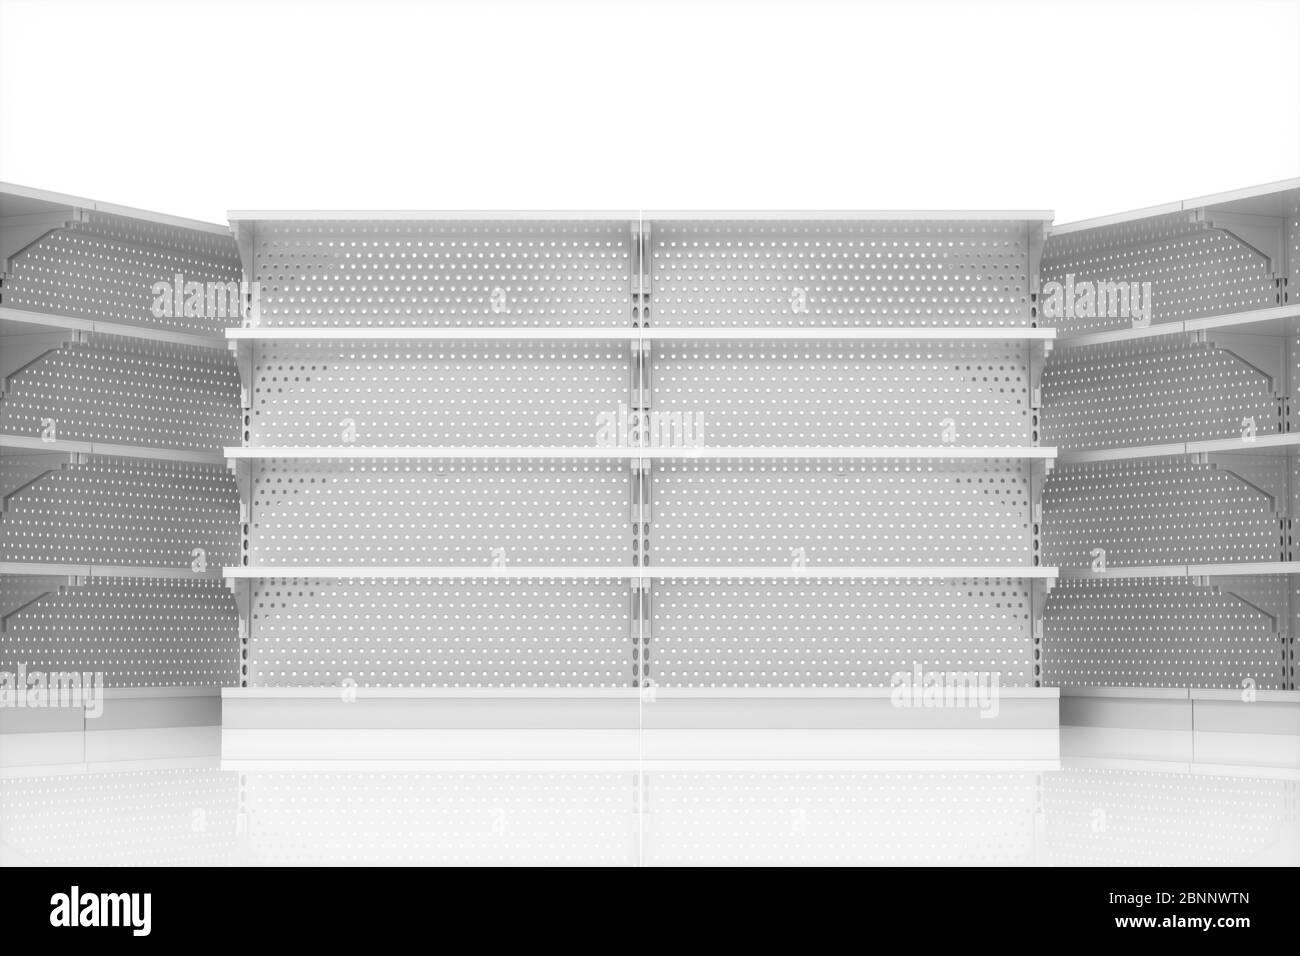 Empty supermarket shelves with white background, 3d rendering. Computer digital drawing. Stock Photo